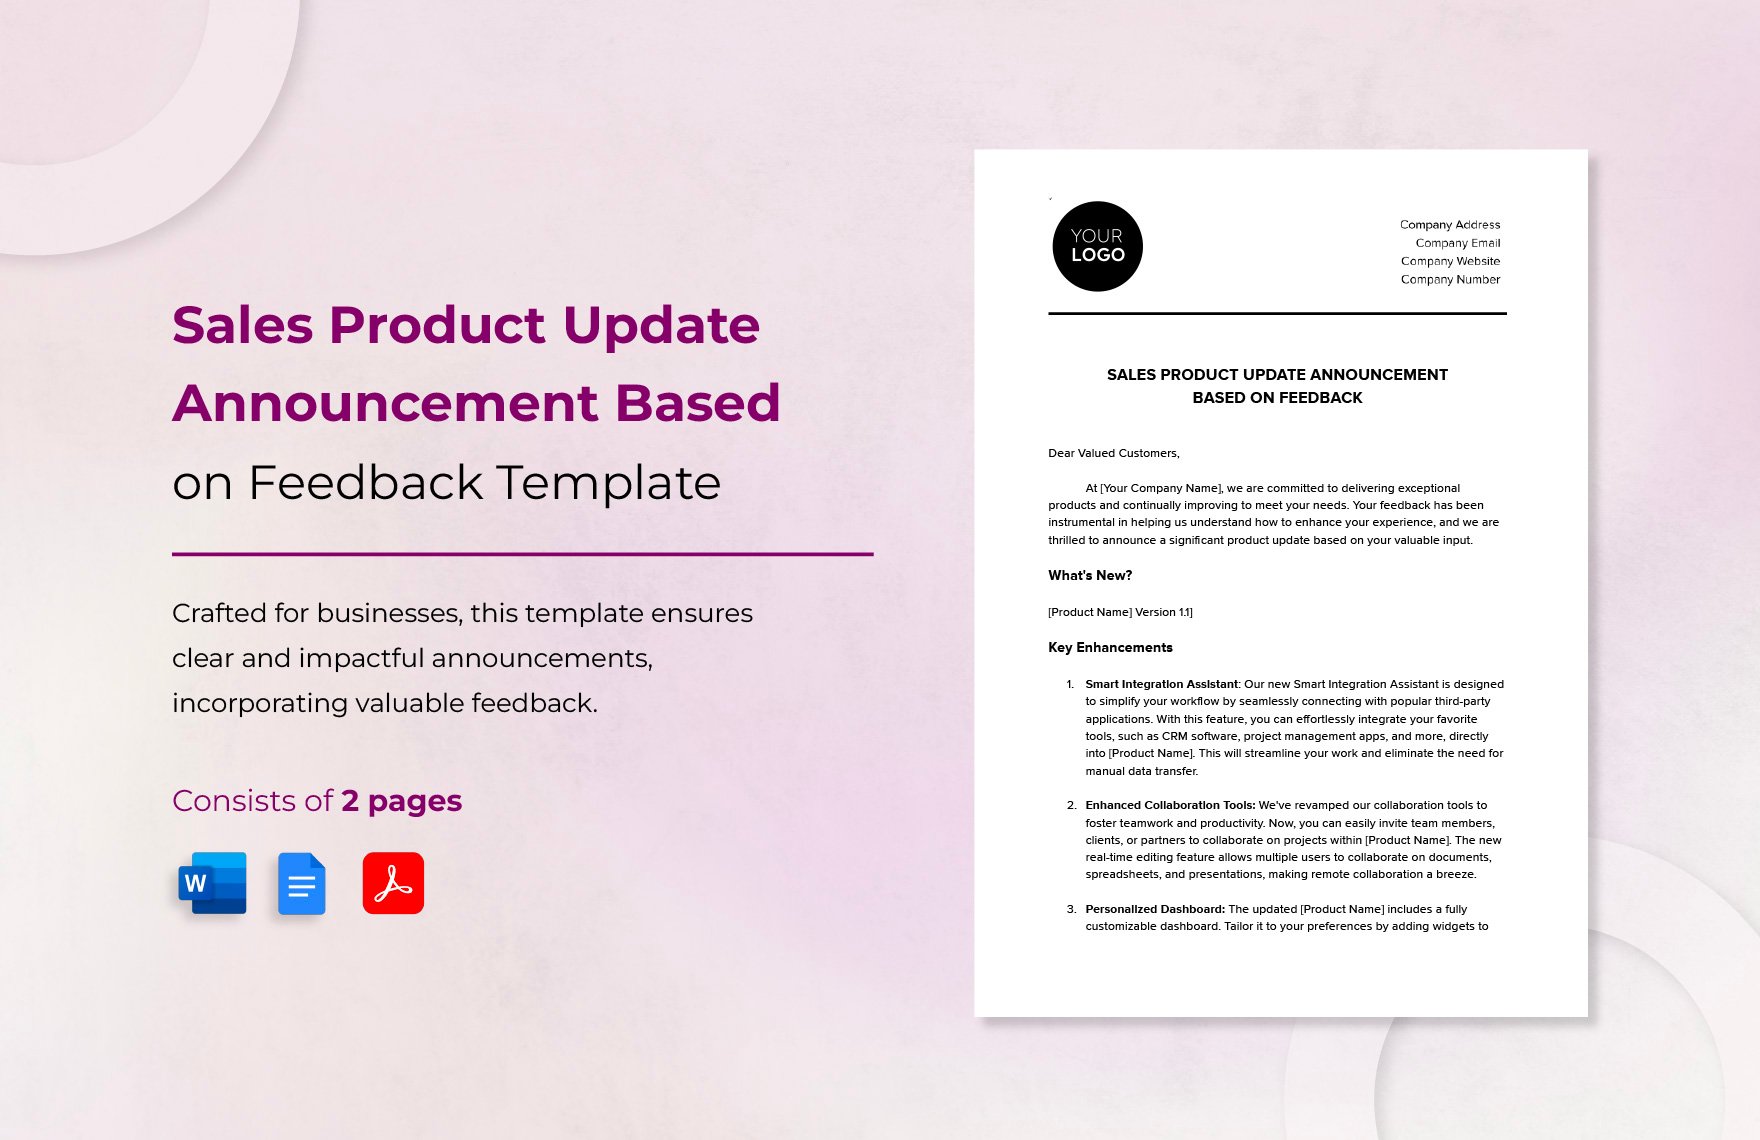 Sales Product Update Announcement Based on Feedback Template in Word